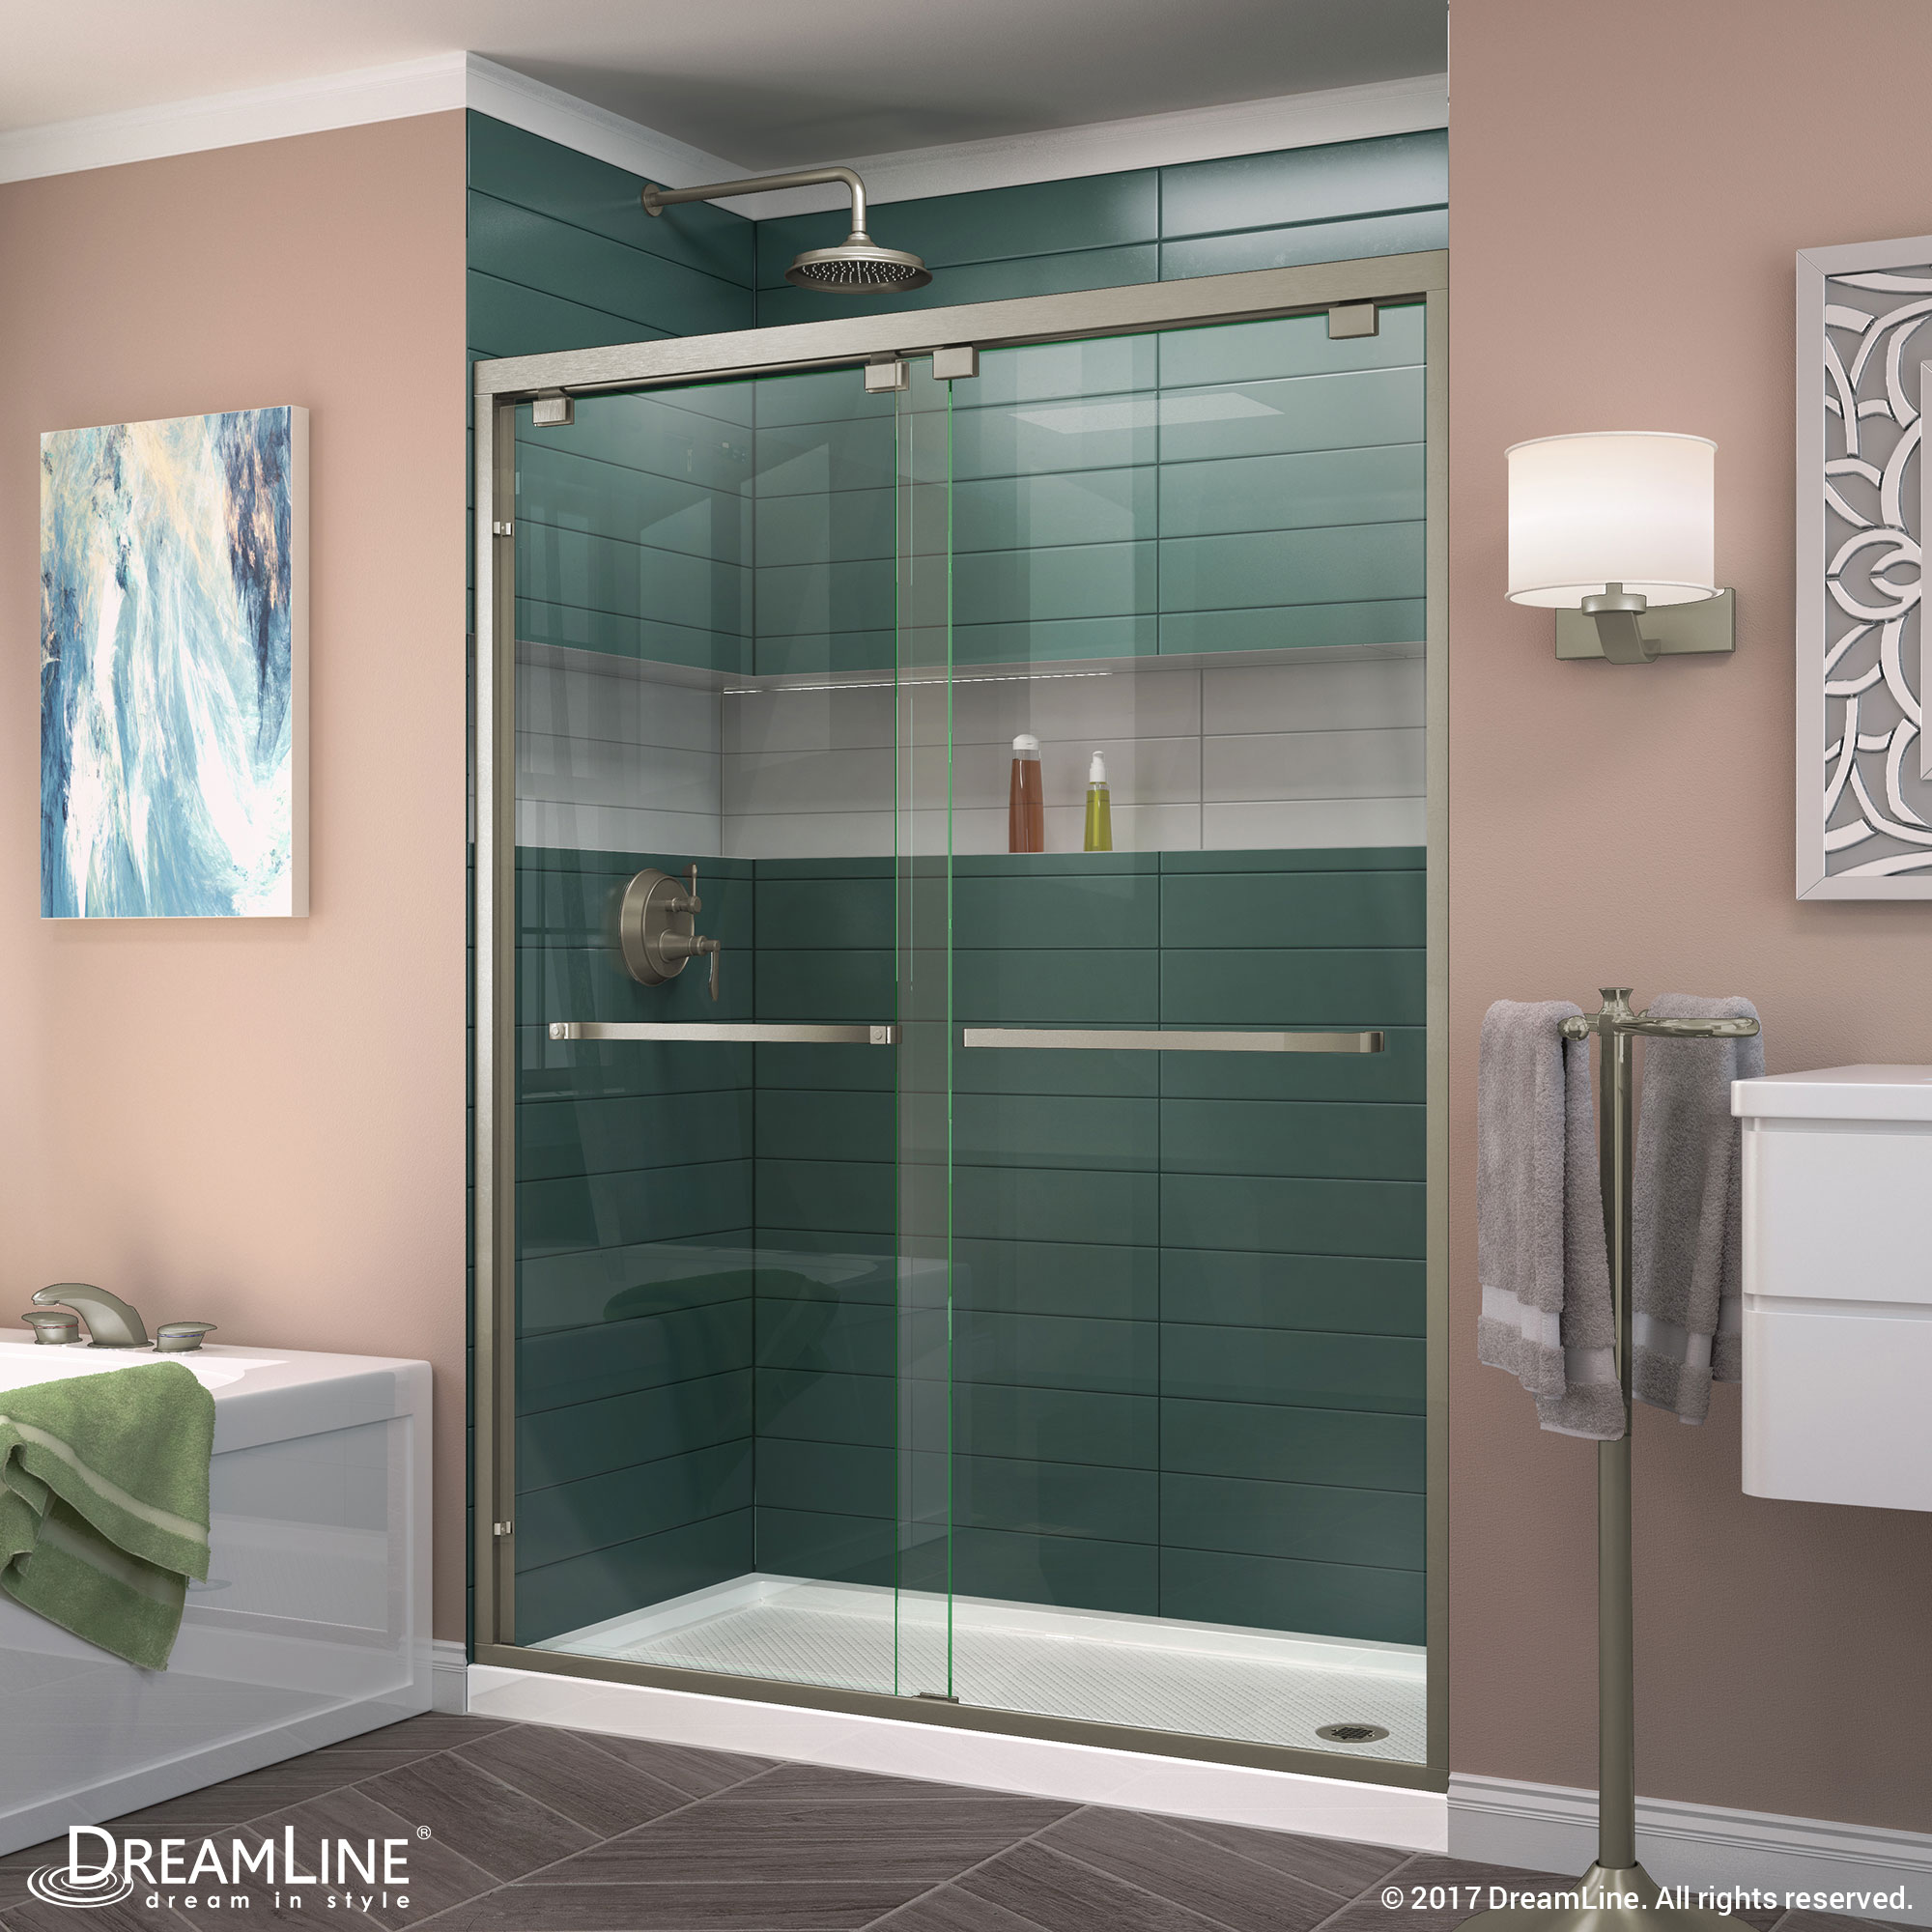 DreamLine Encore 36 in. D x 60 in. W x 78 3/4 in. H Bypass Shower Door in Chrome and Right Drain White Base Kit